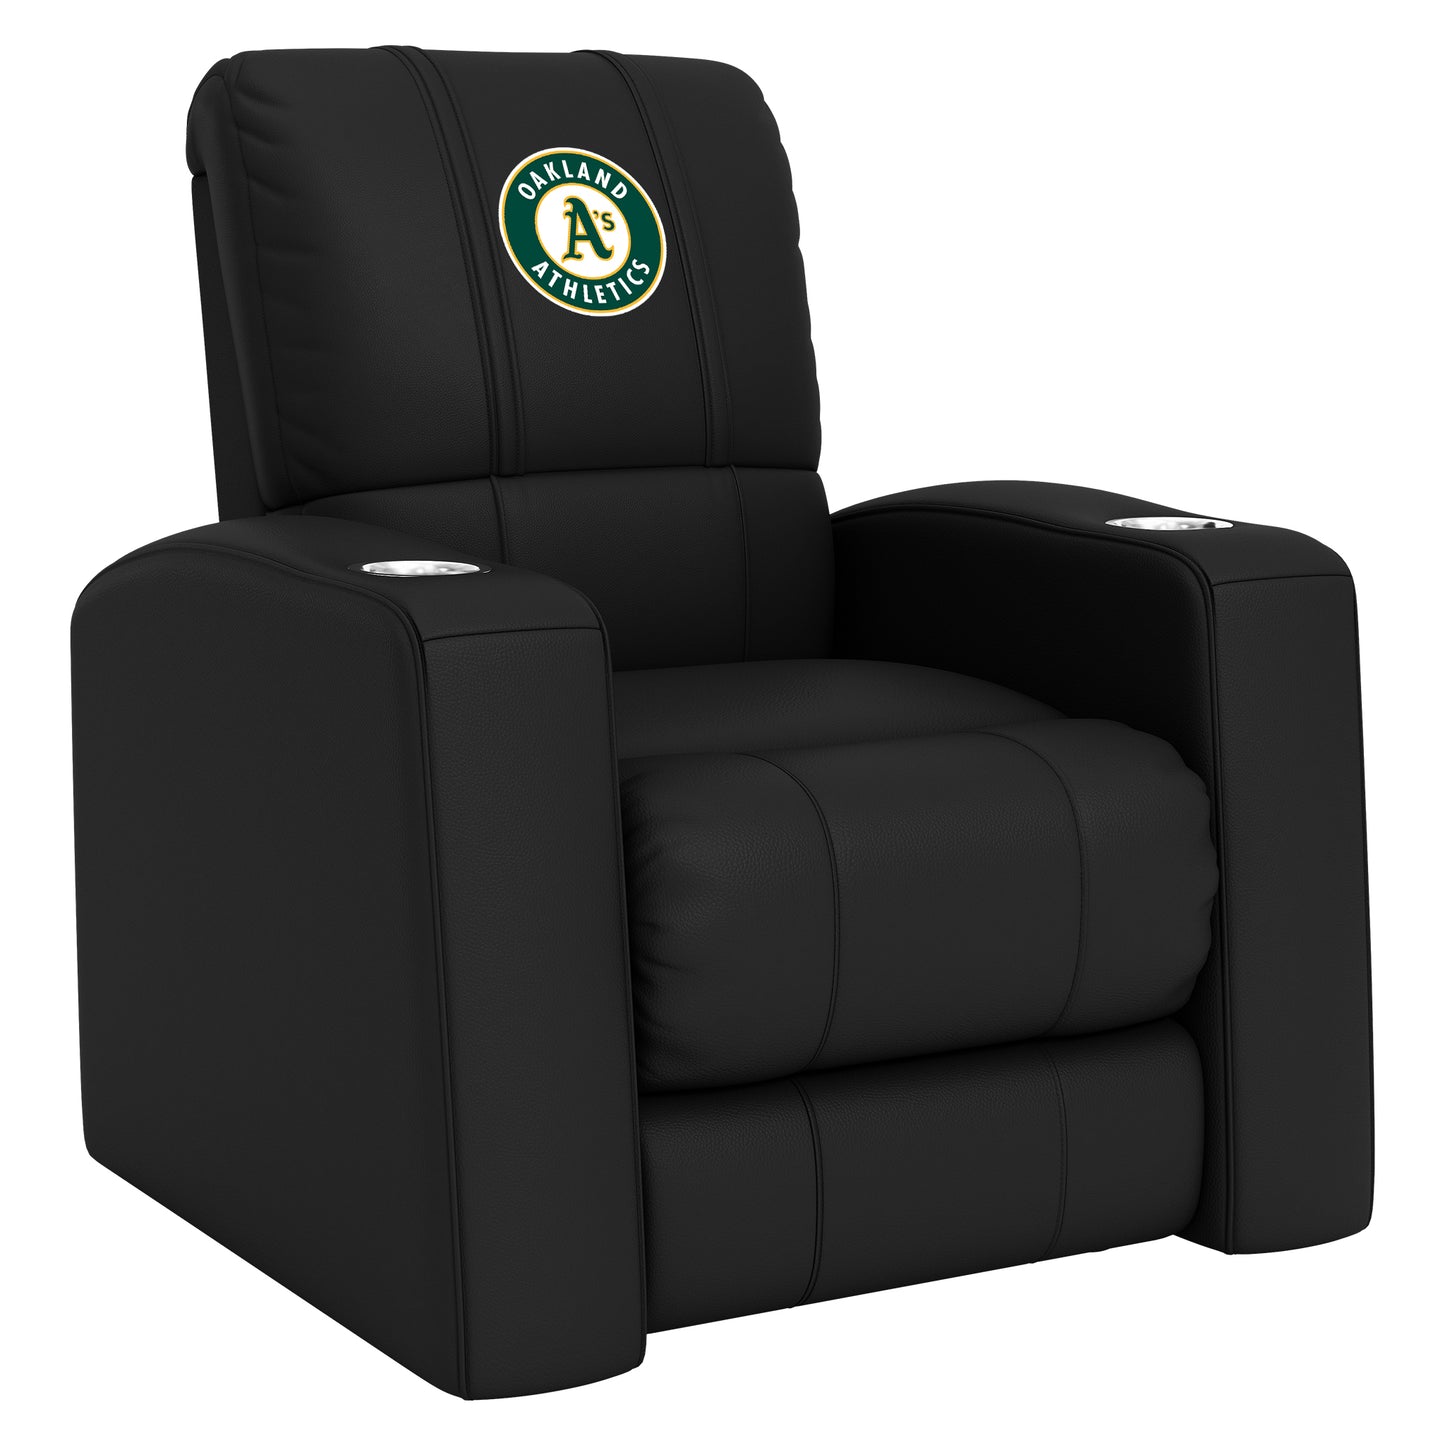 Relax Home Theater Recliner with Oakland Athletics Logo